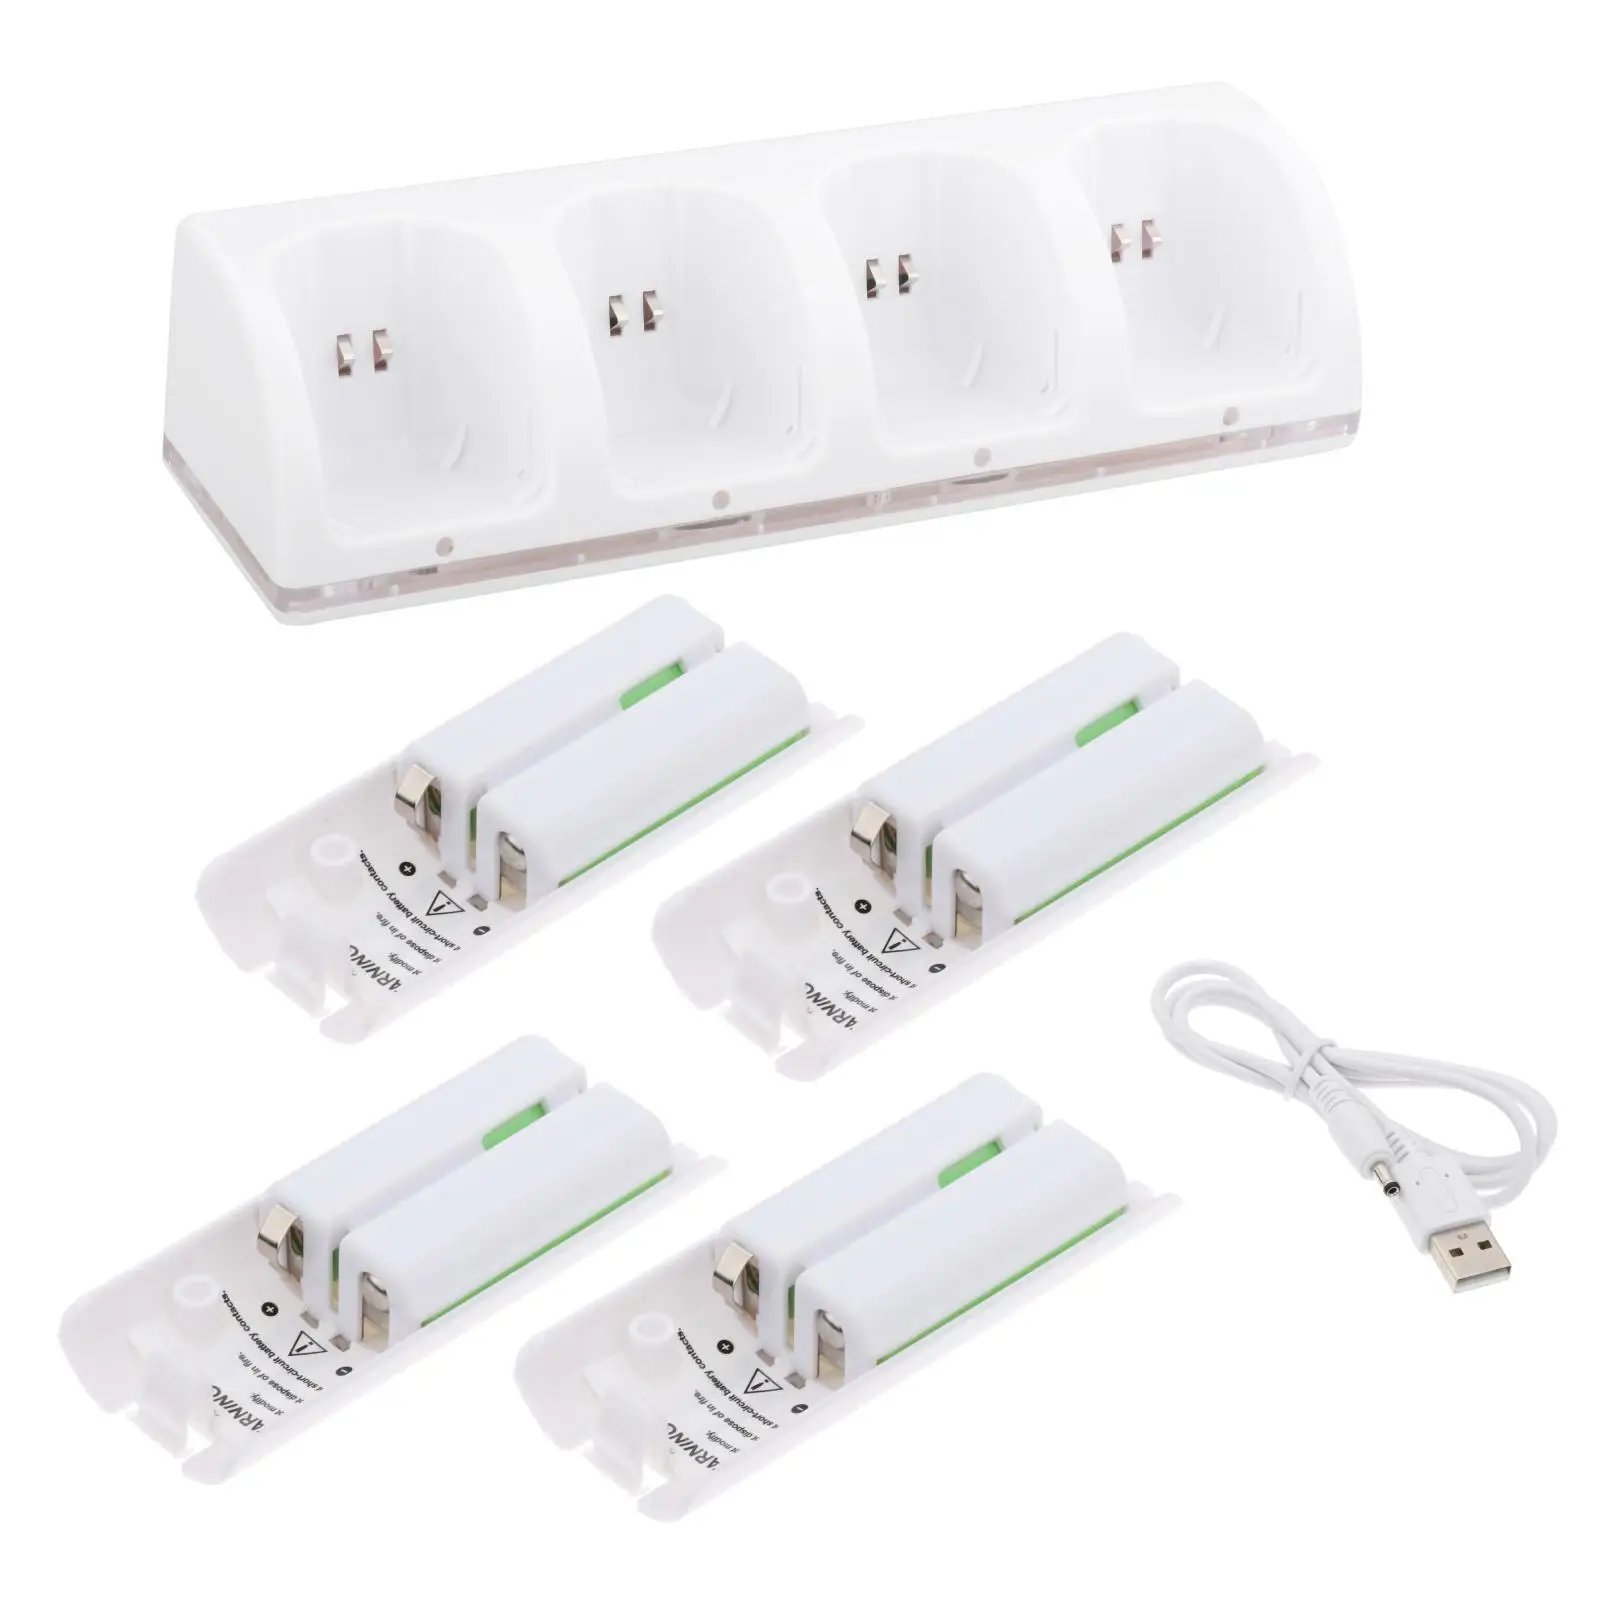 Charging Dock Station with 4 Rechargeable Batteries And USB Cable,  Battery Charger for Controller Game Accessories